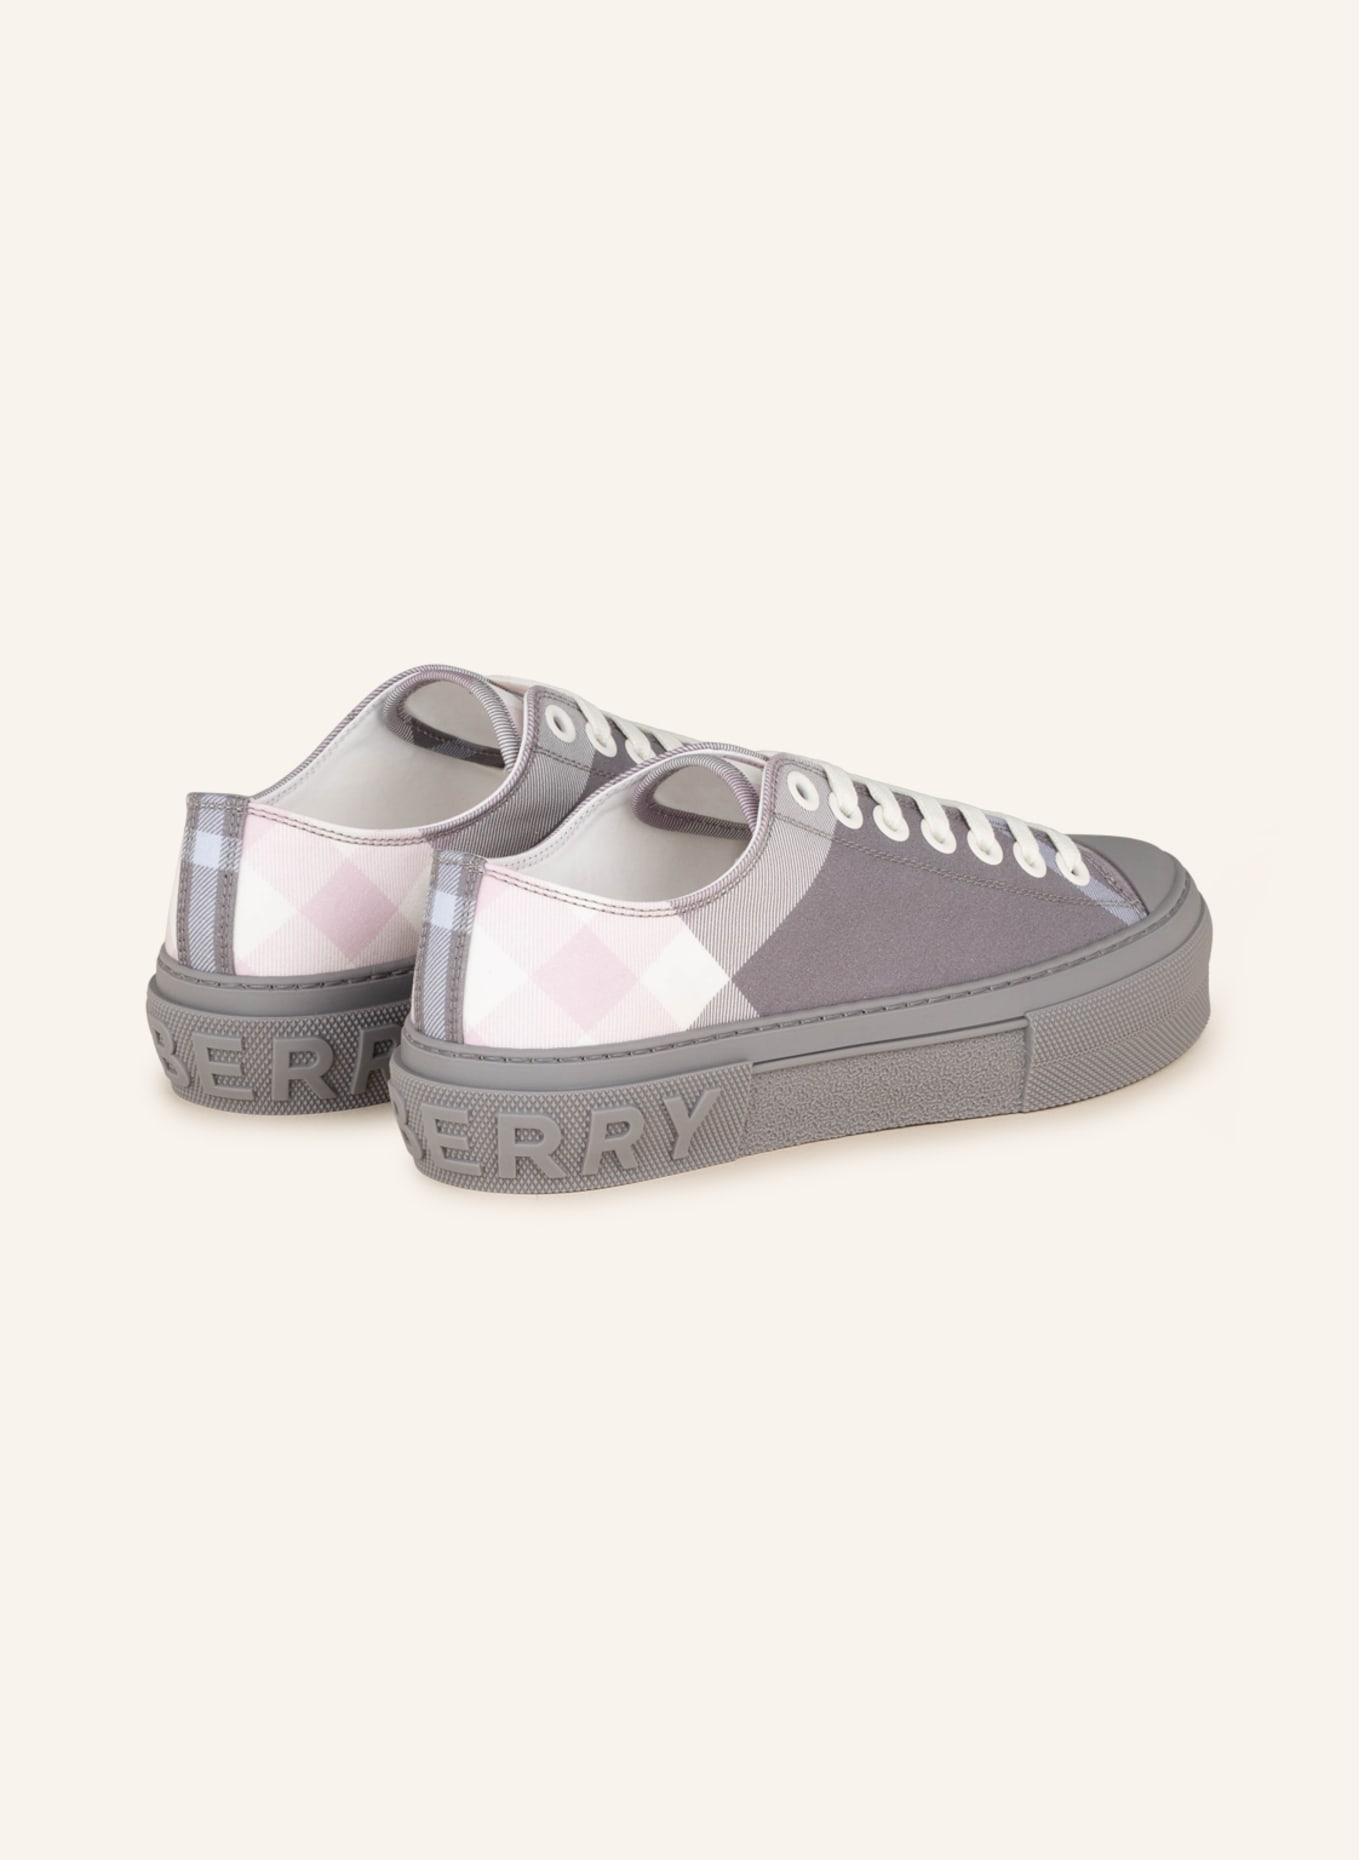 BURBERRY Sneakers JACK , Color: GRAY/ LIGHT GRAY/ LIGHT PINK (Image 2)